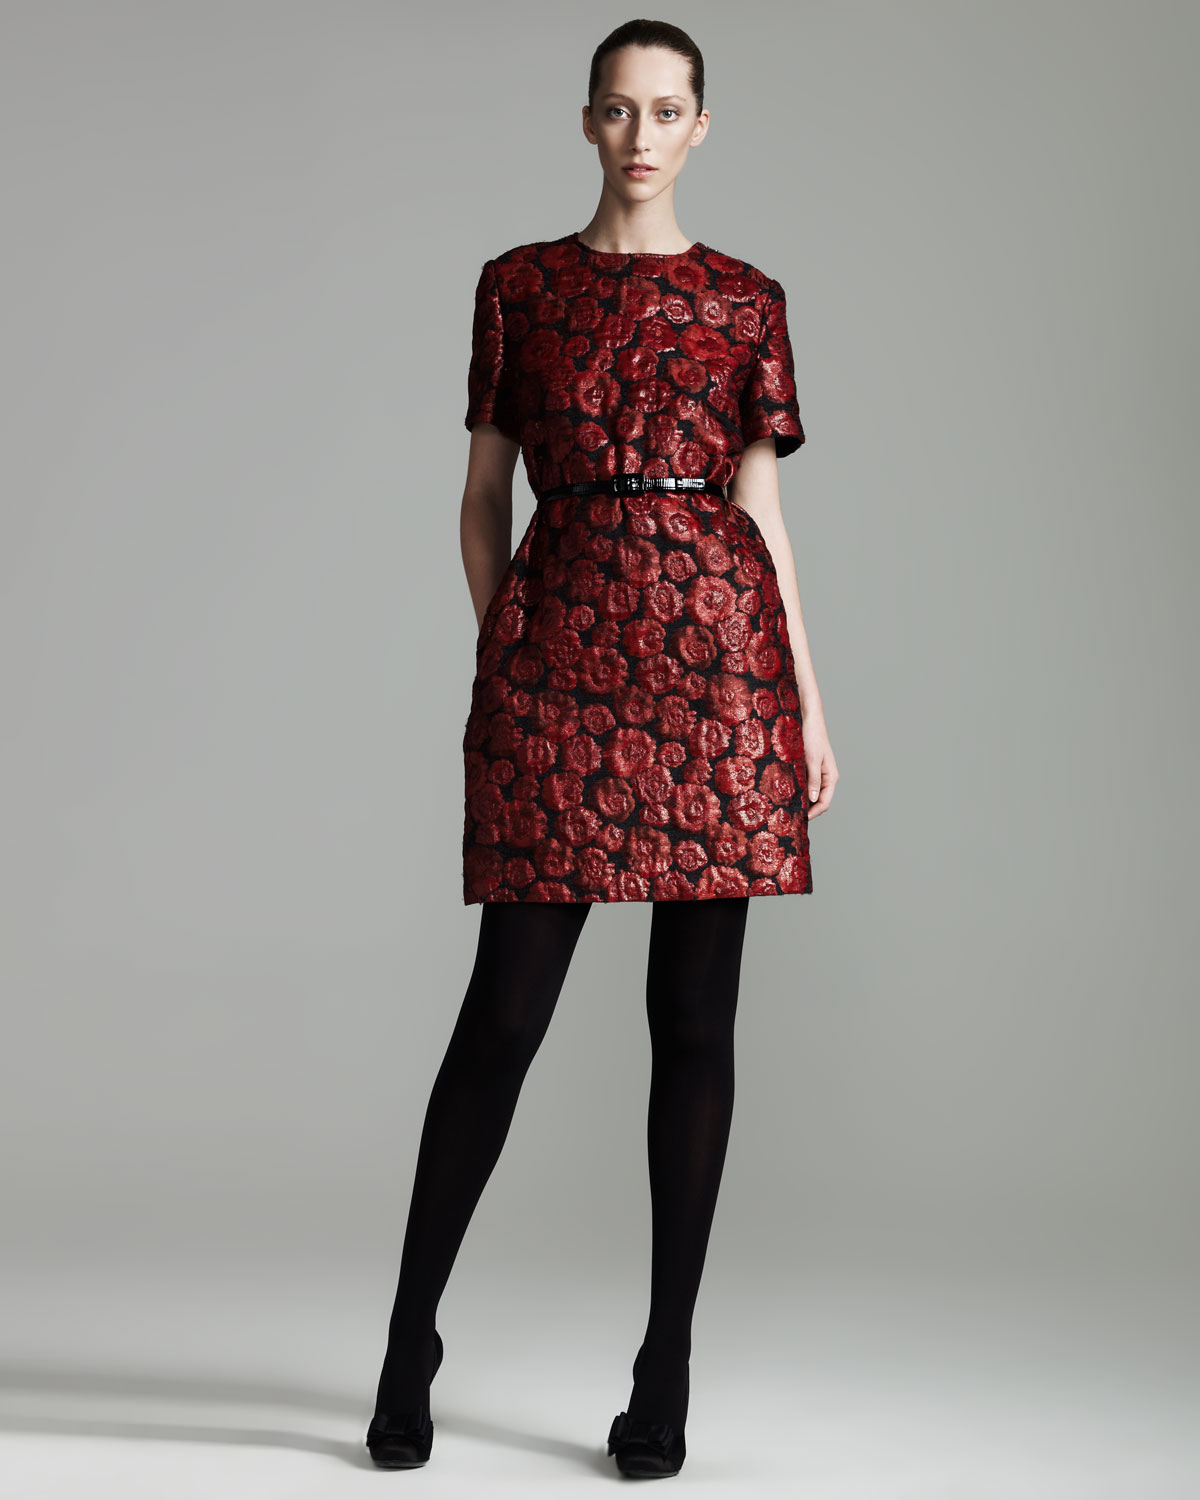 Lyst - Lanvin Floral Jacquard Dress in Red